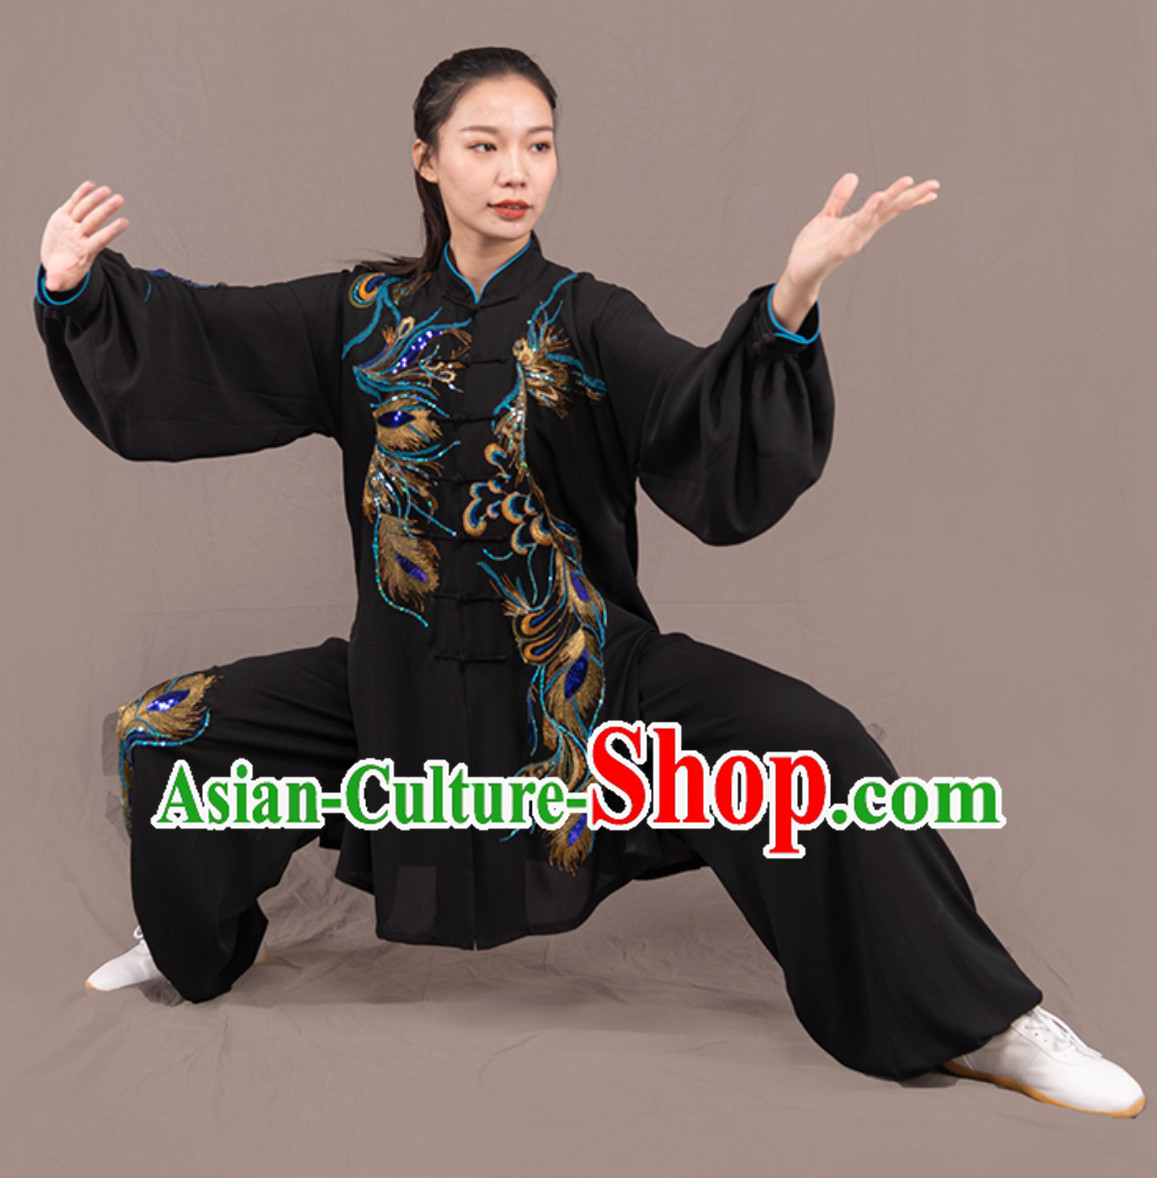 Black Top Chinese Traditional Competition Championship Professional Tai Chi Uniforms Taiji Kung Fu Wing Chun Kungfu Tai Ji Sword Gong Fu Master Clothing Suits Clothes Complete Set for Women